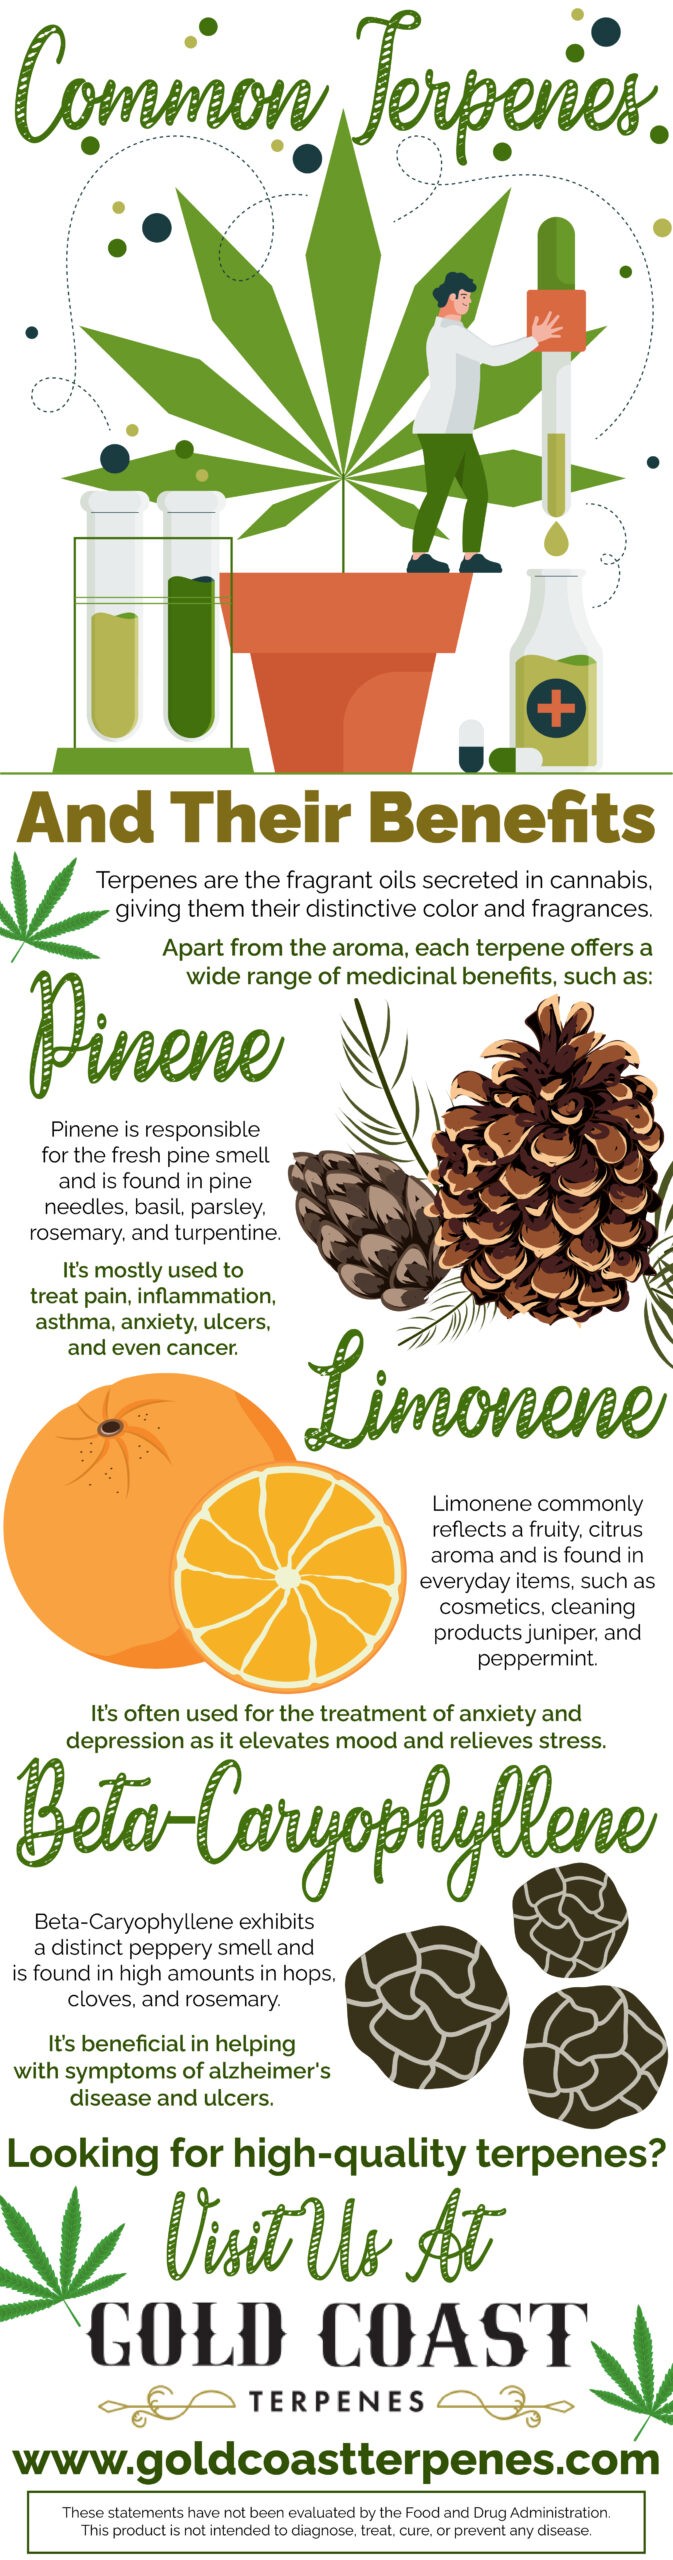 Common terpenes and their benefits - Infograph